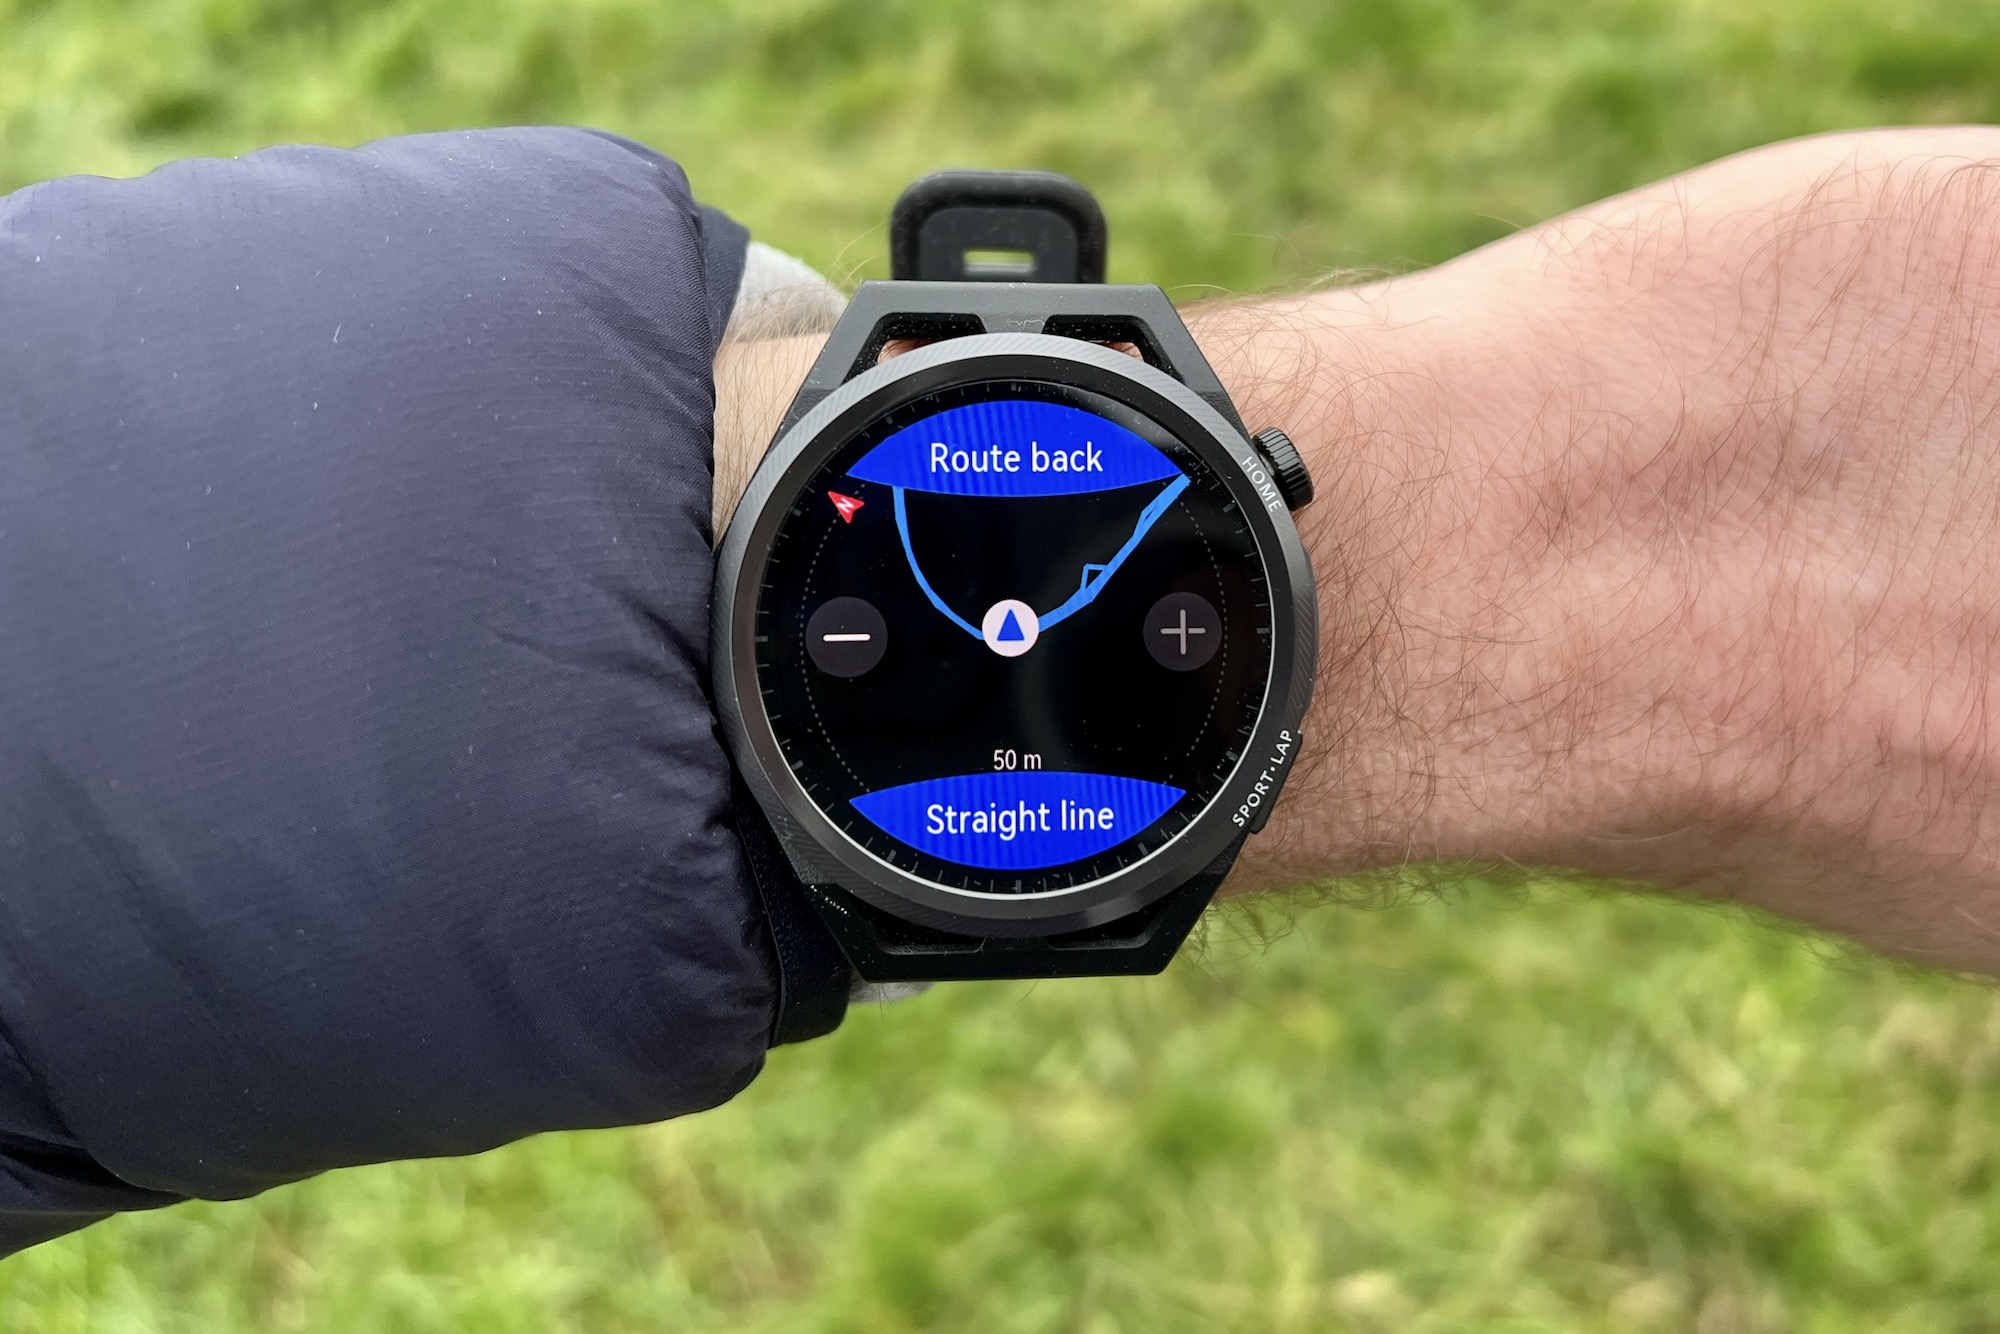 Huawei Watch GT Runner Route Back feature.